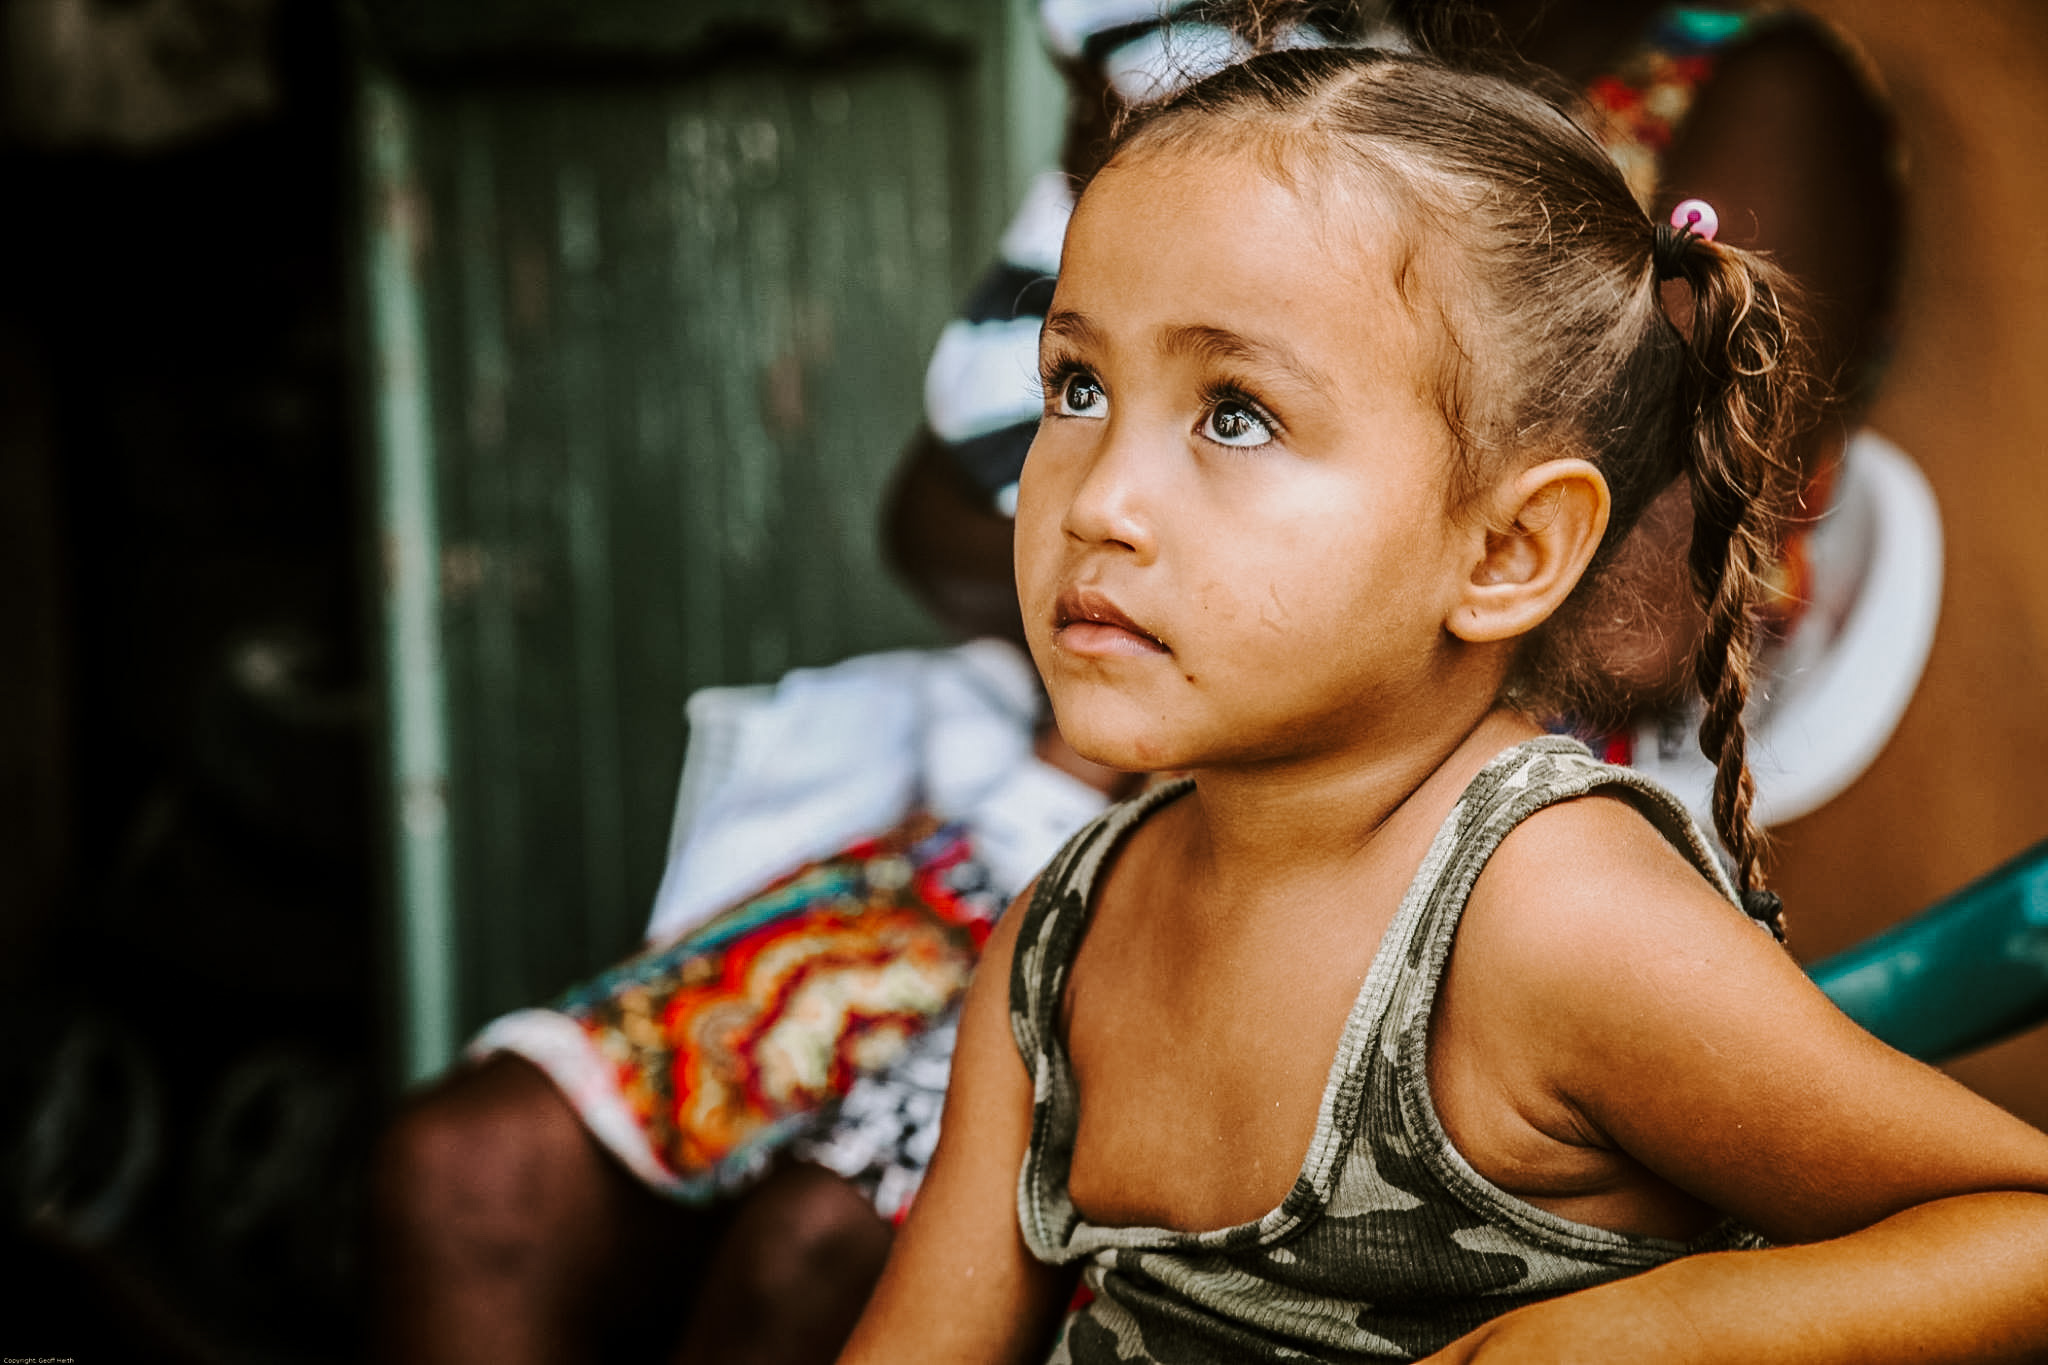 Photo of a little girl from the Dominican Republic